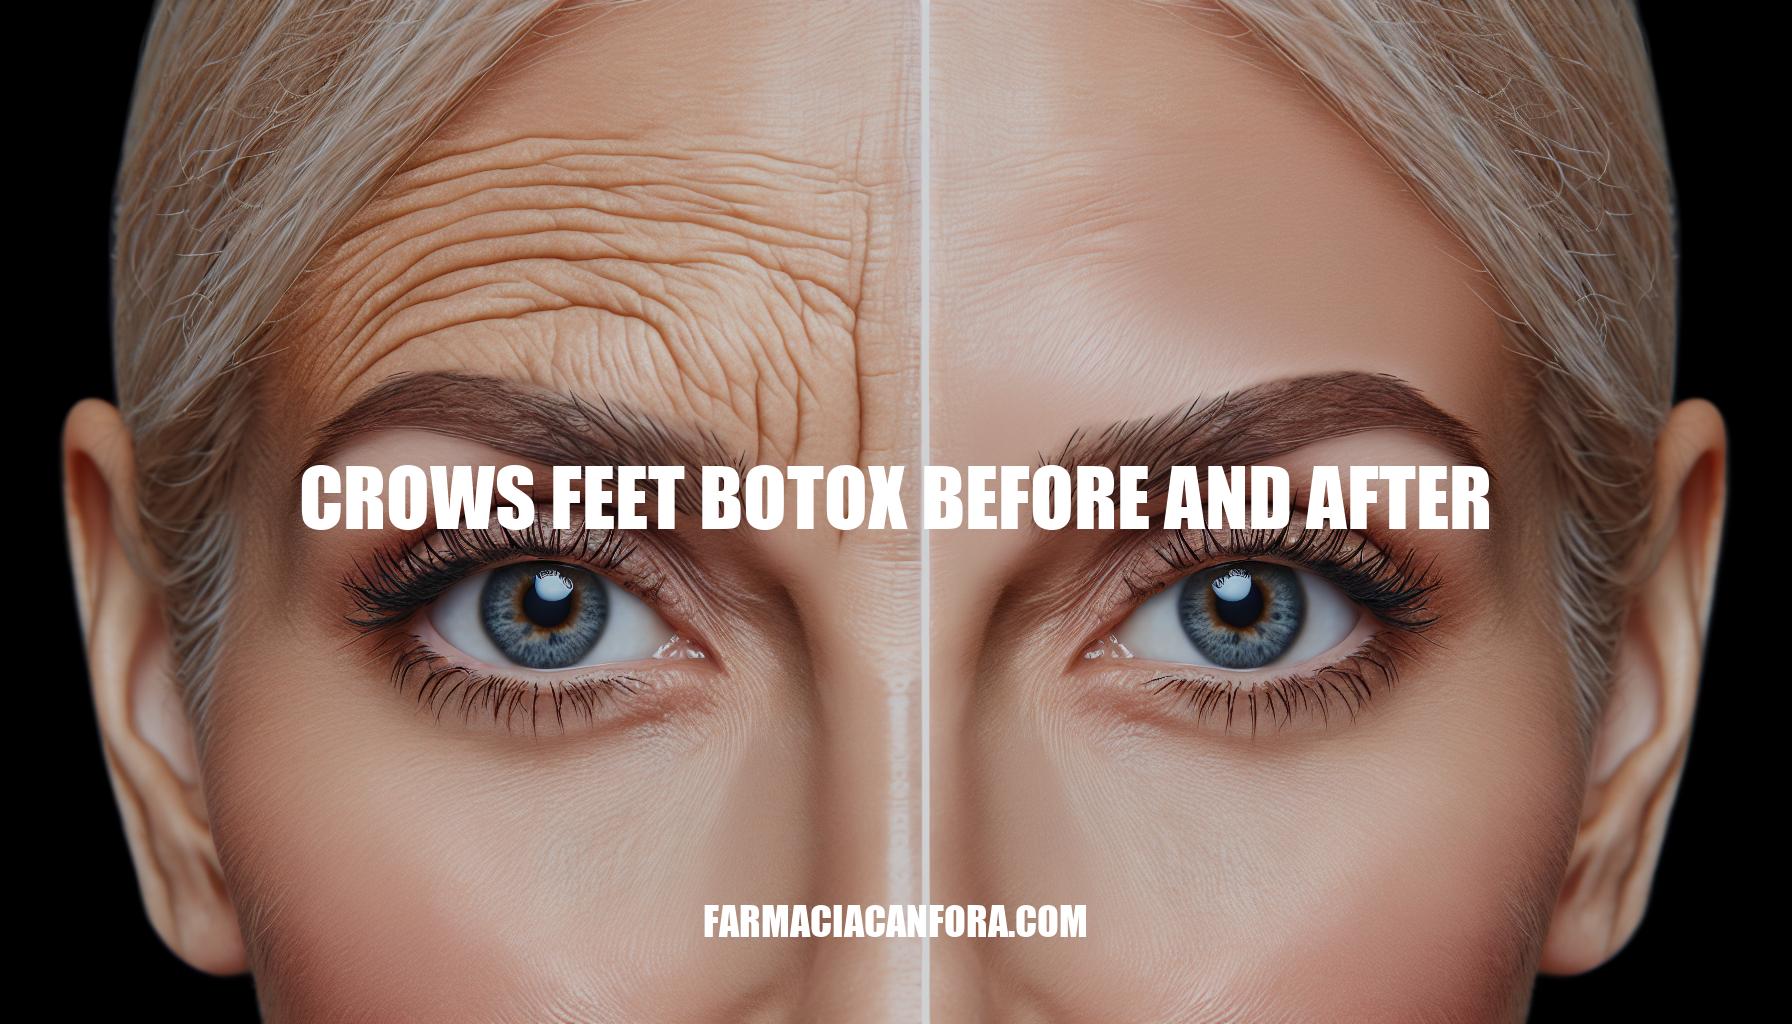 Crow's Feet Botox Before and After: A Complete Guide